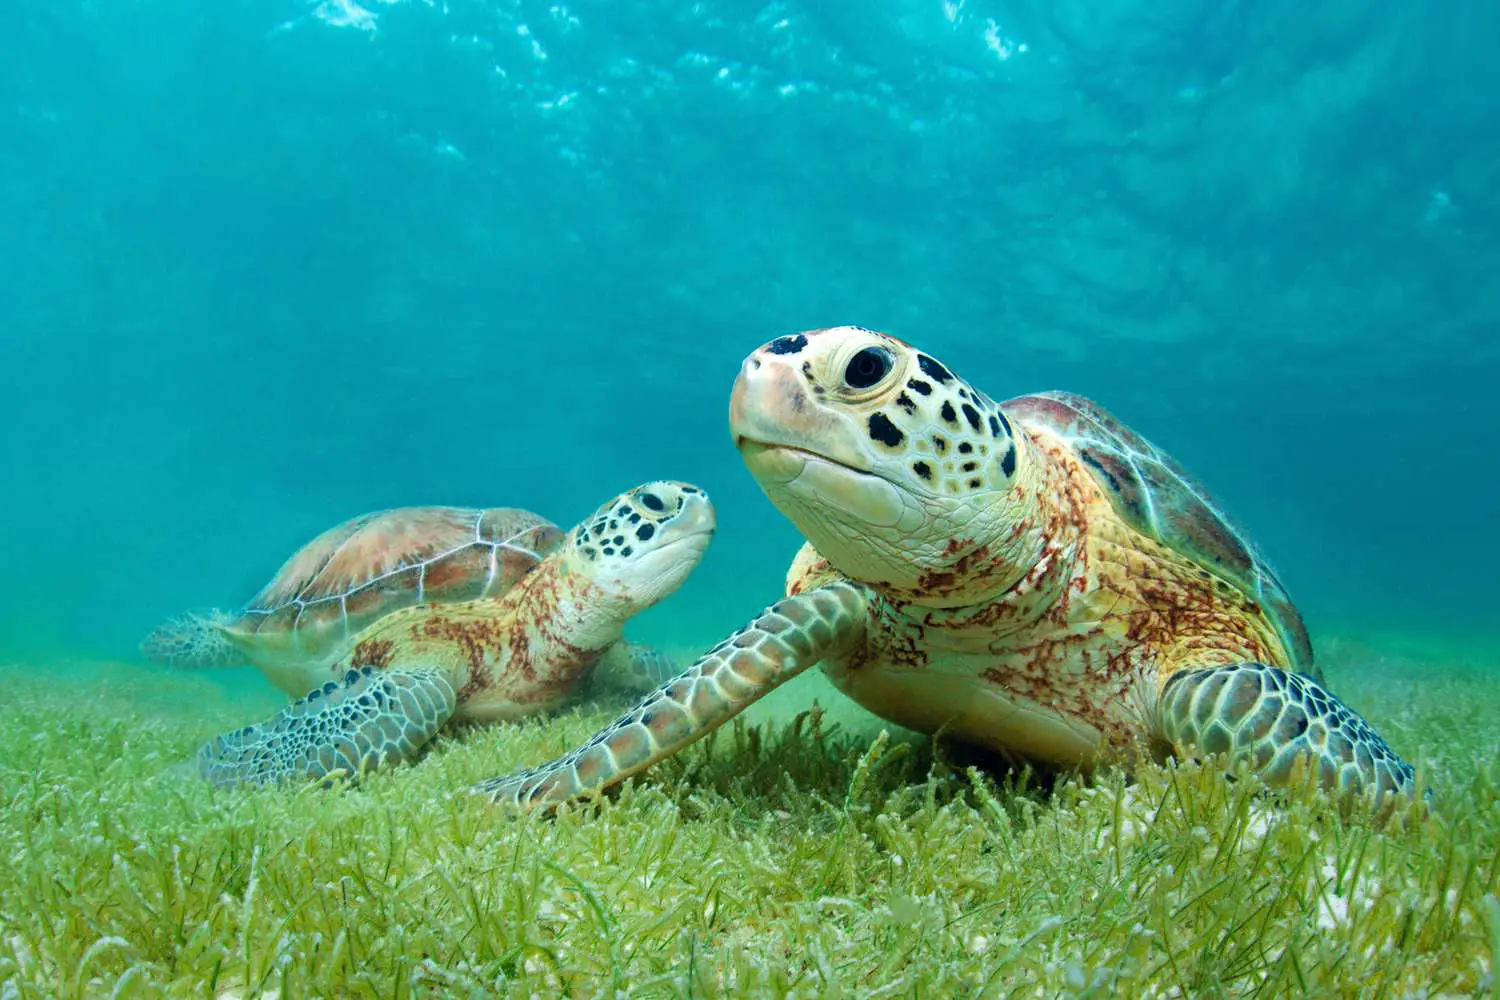  Can Sea Turtles Live On Land